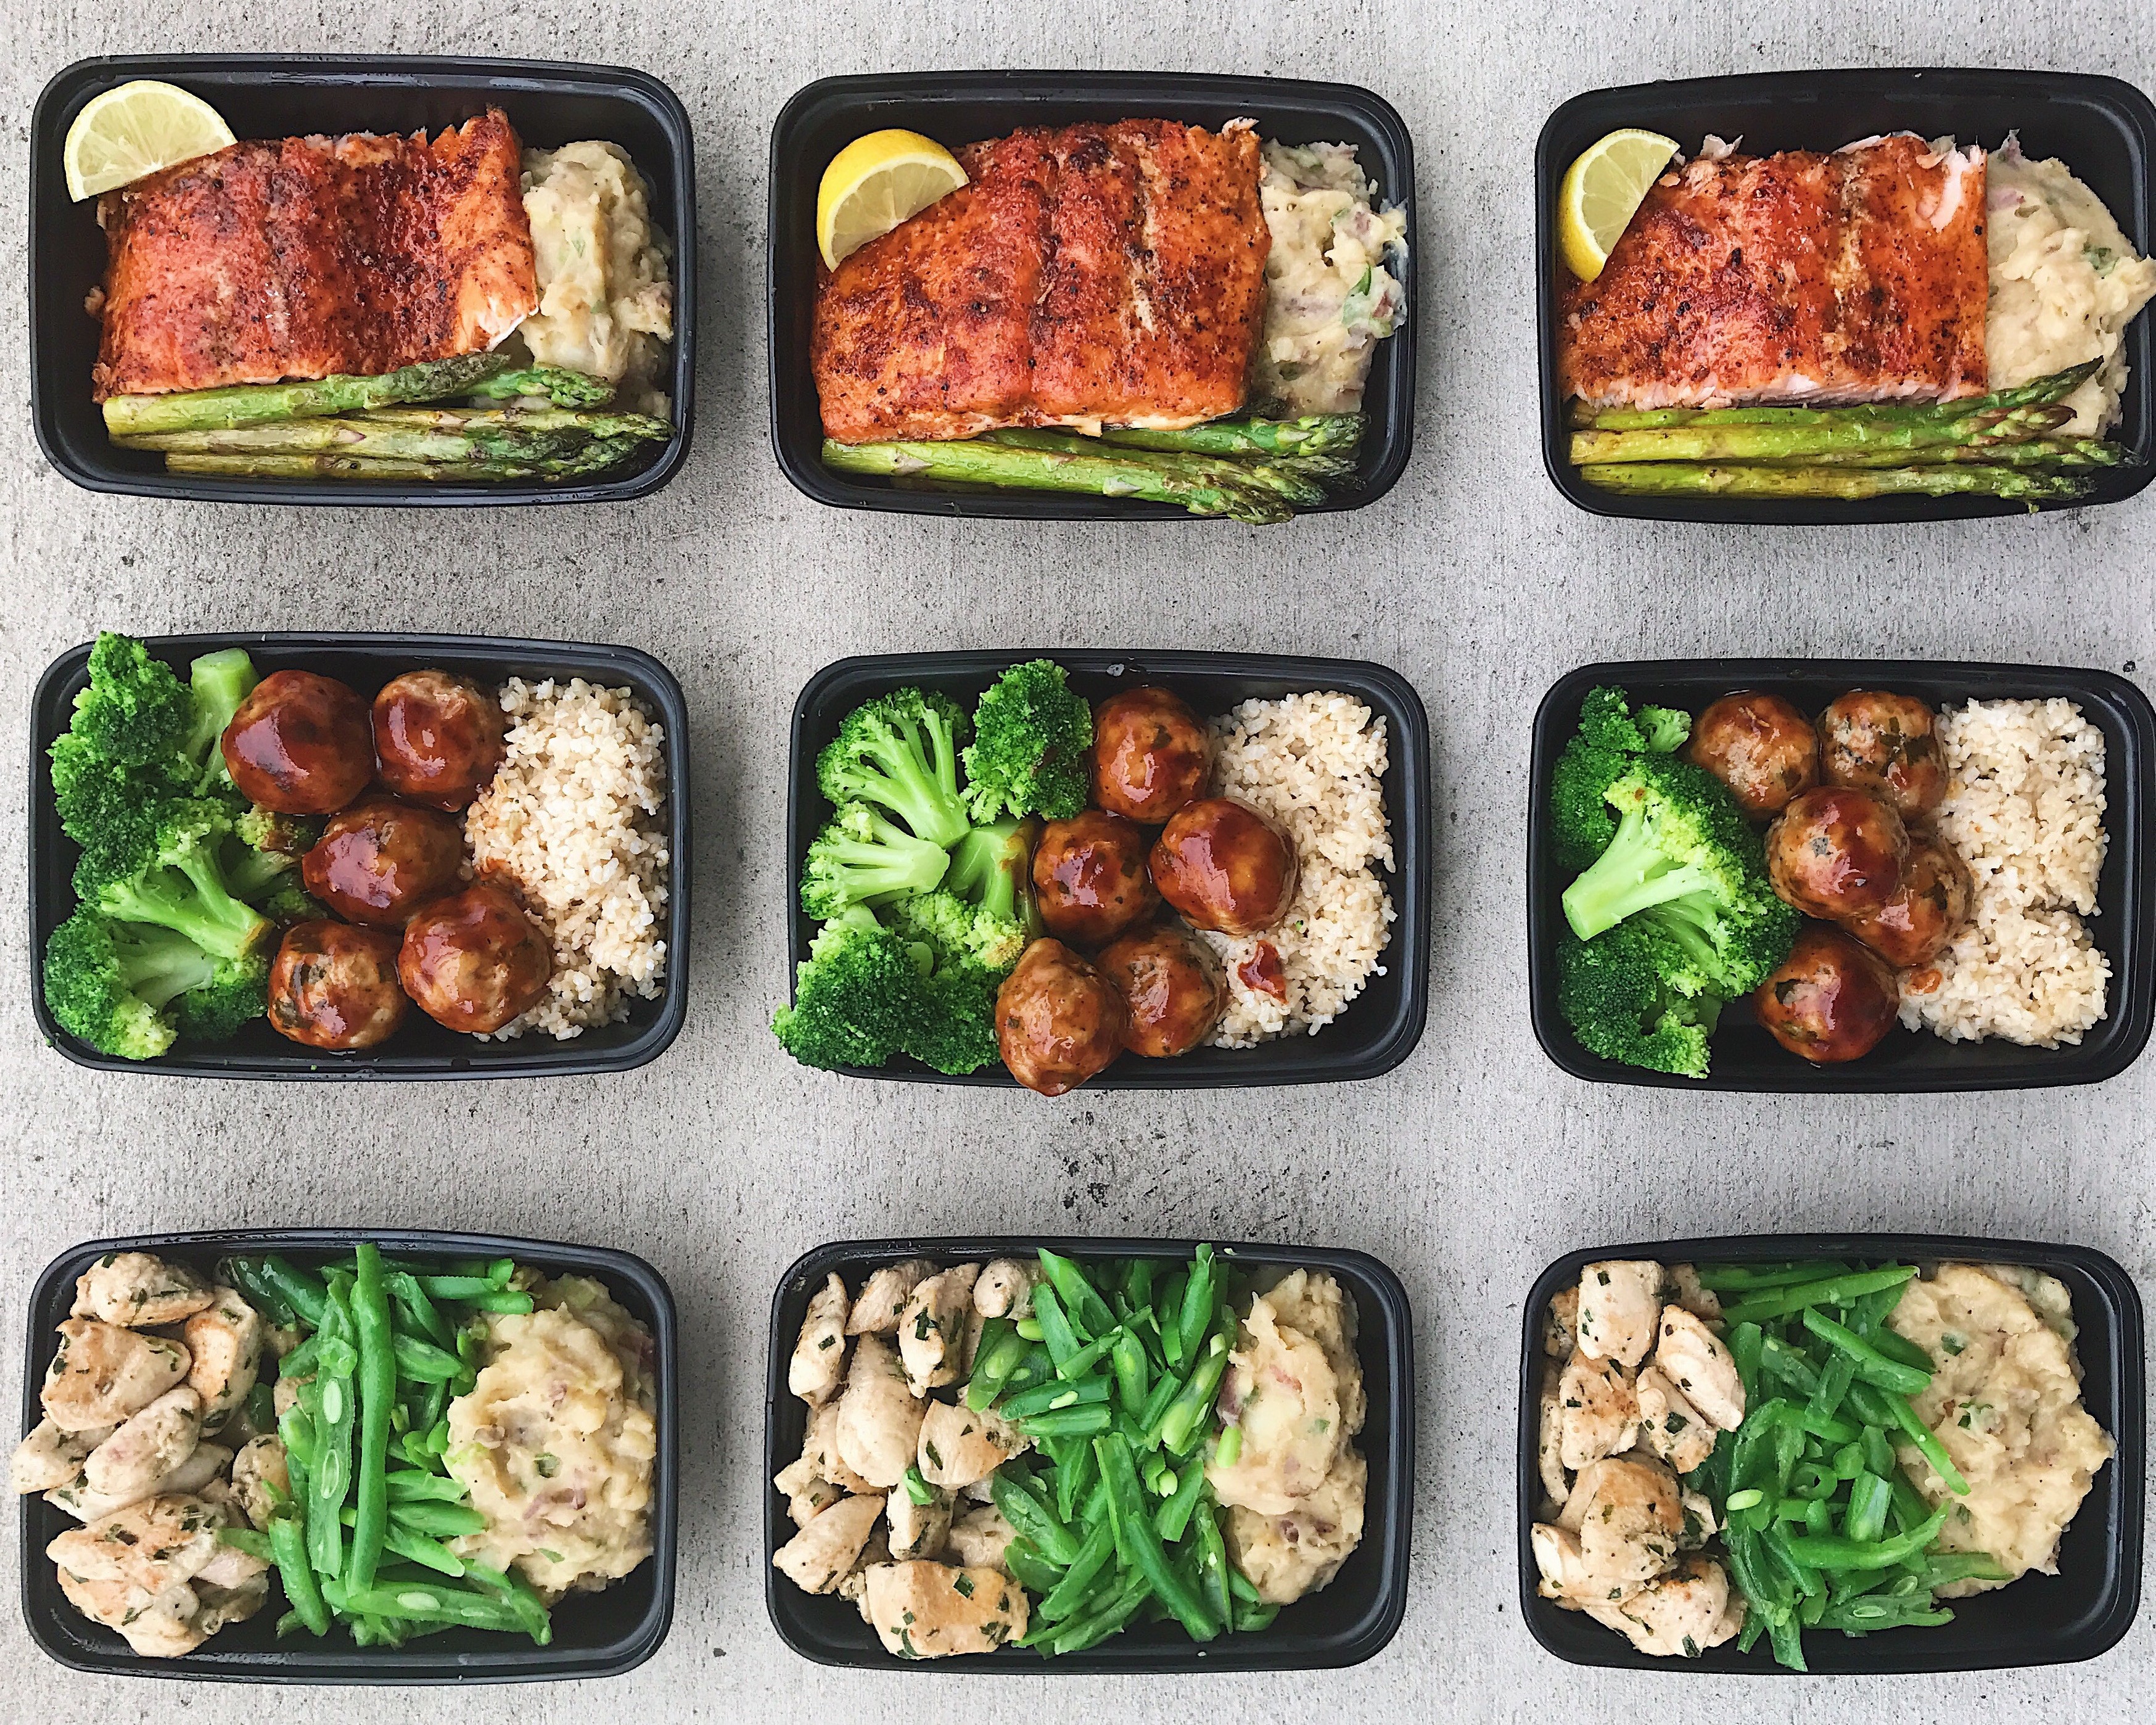 Things People Do Wrong When Meal Prepping, and How to Fix